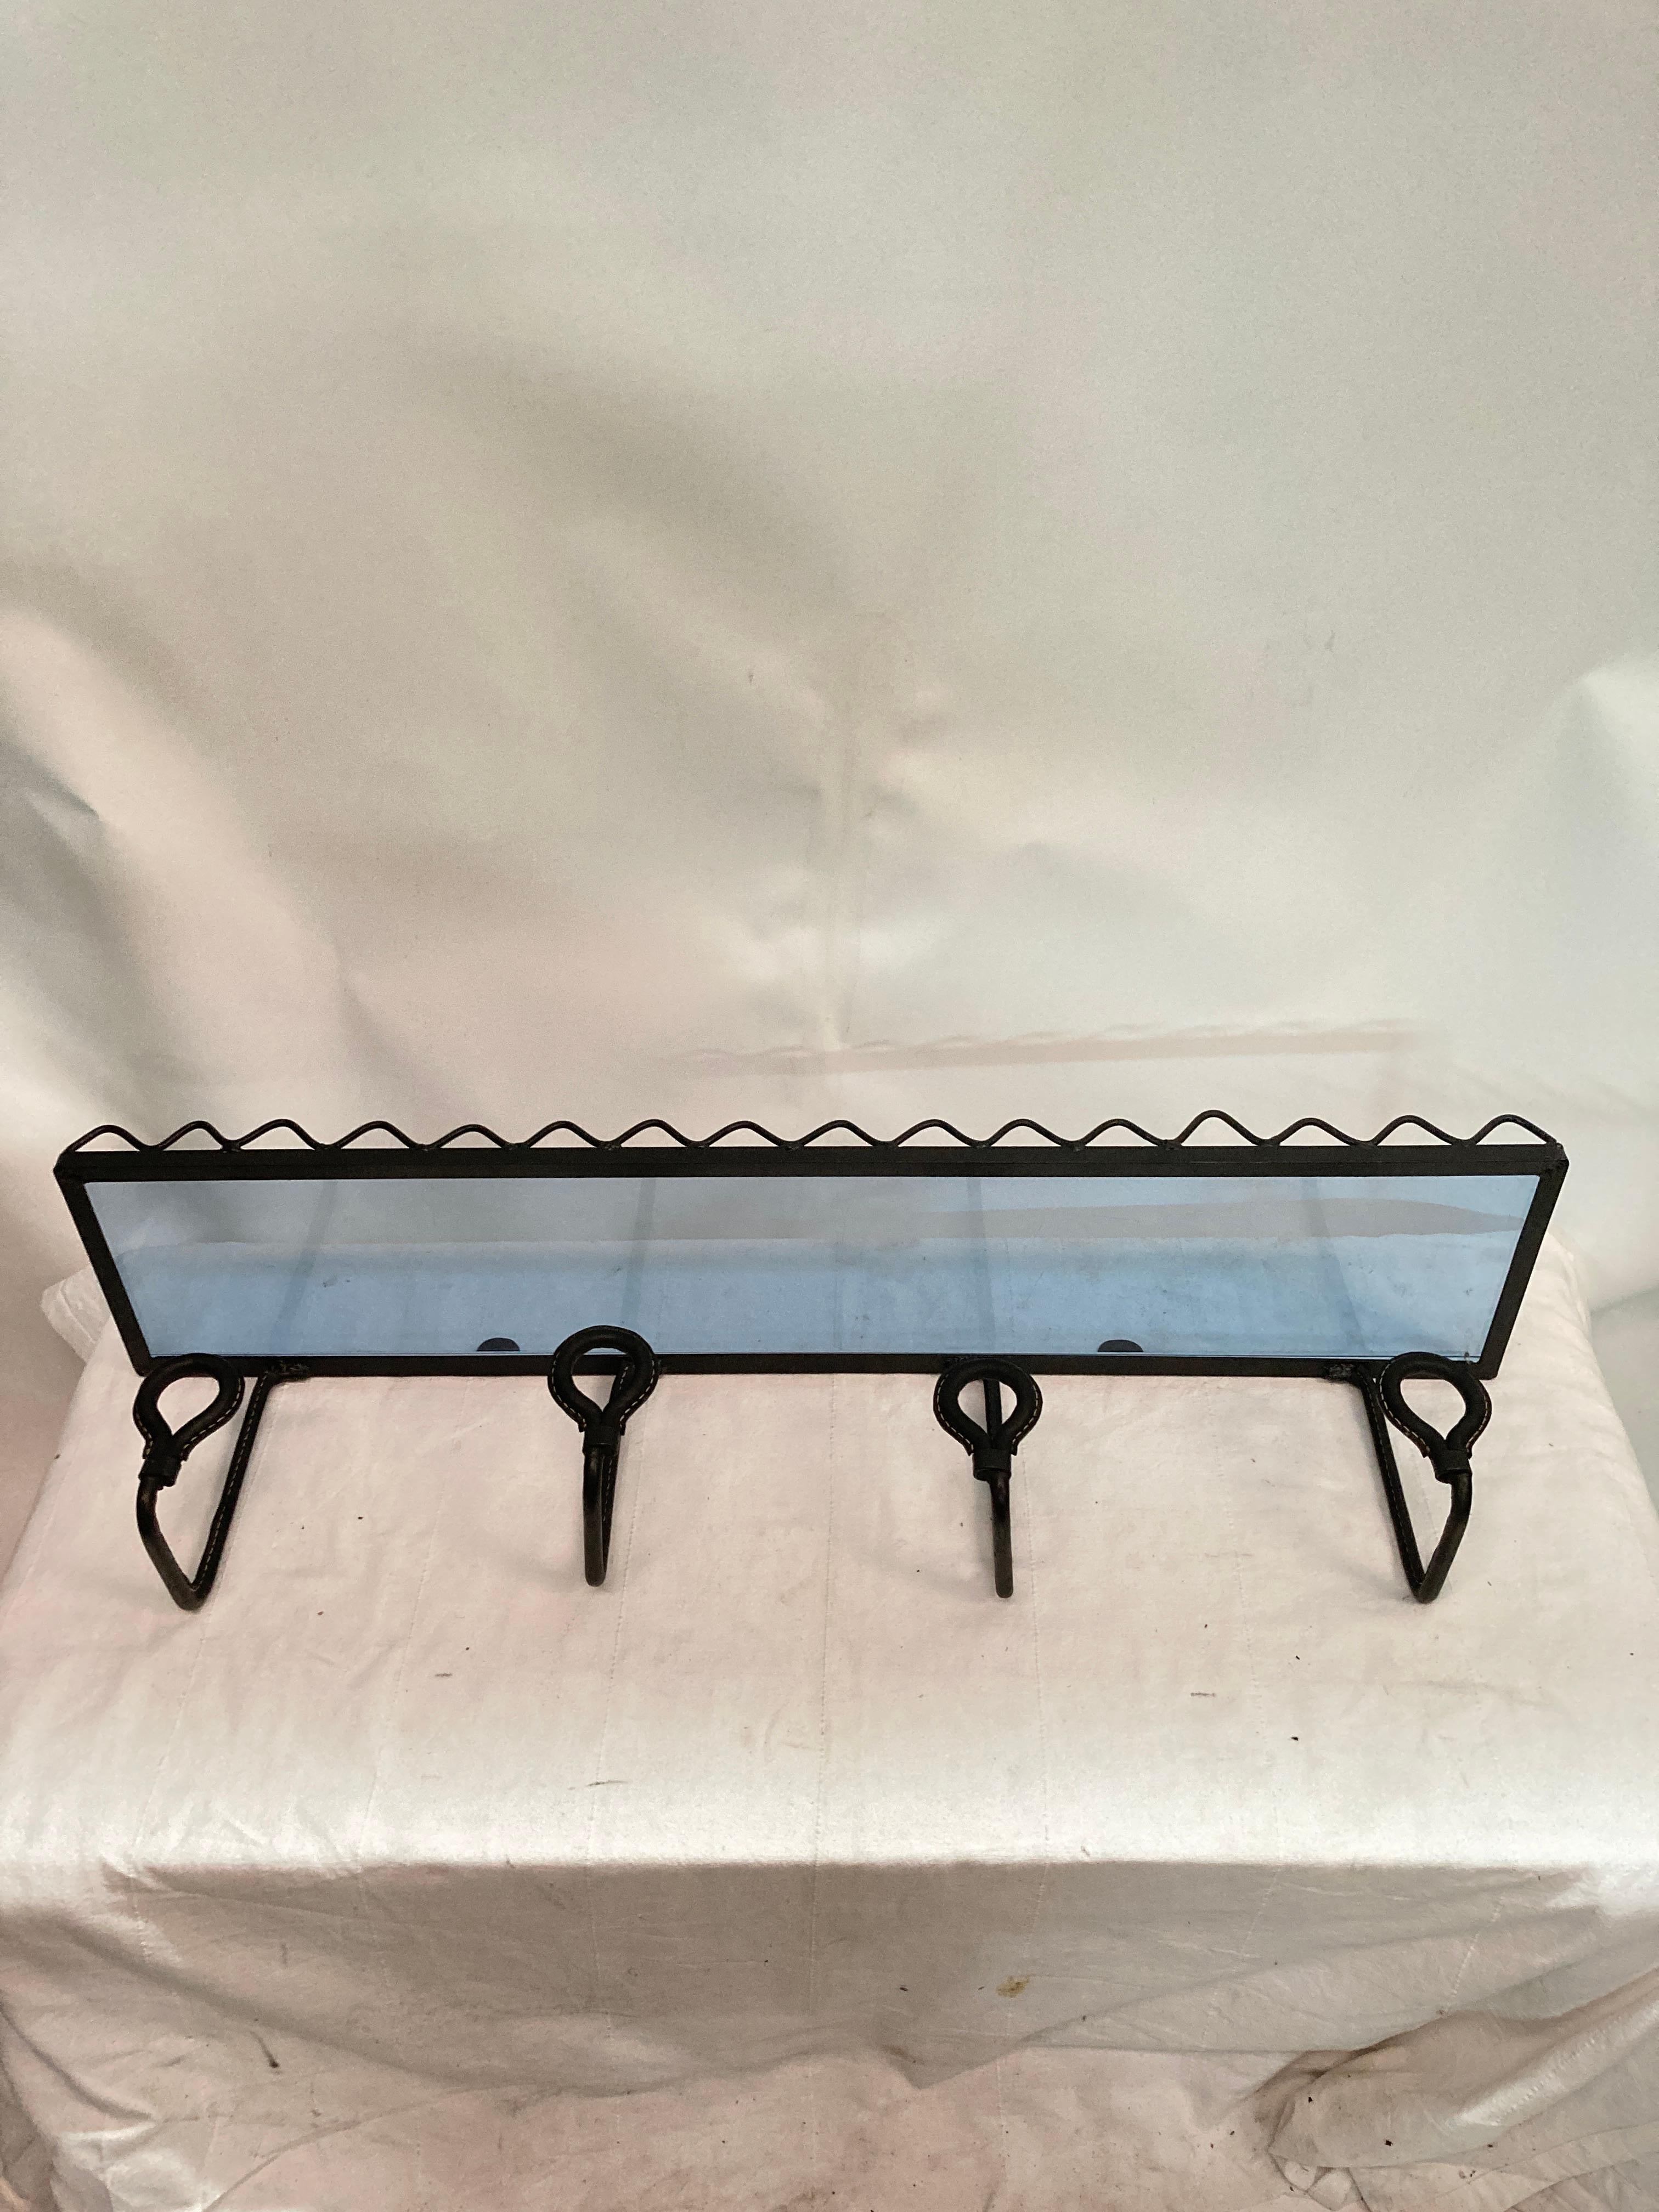 1950's Stitched leather coat rack by Jacques Adnet
with blue Saint-Gobain glass